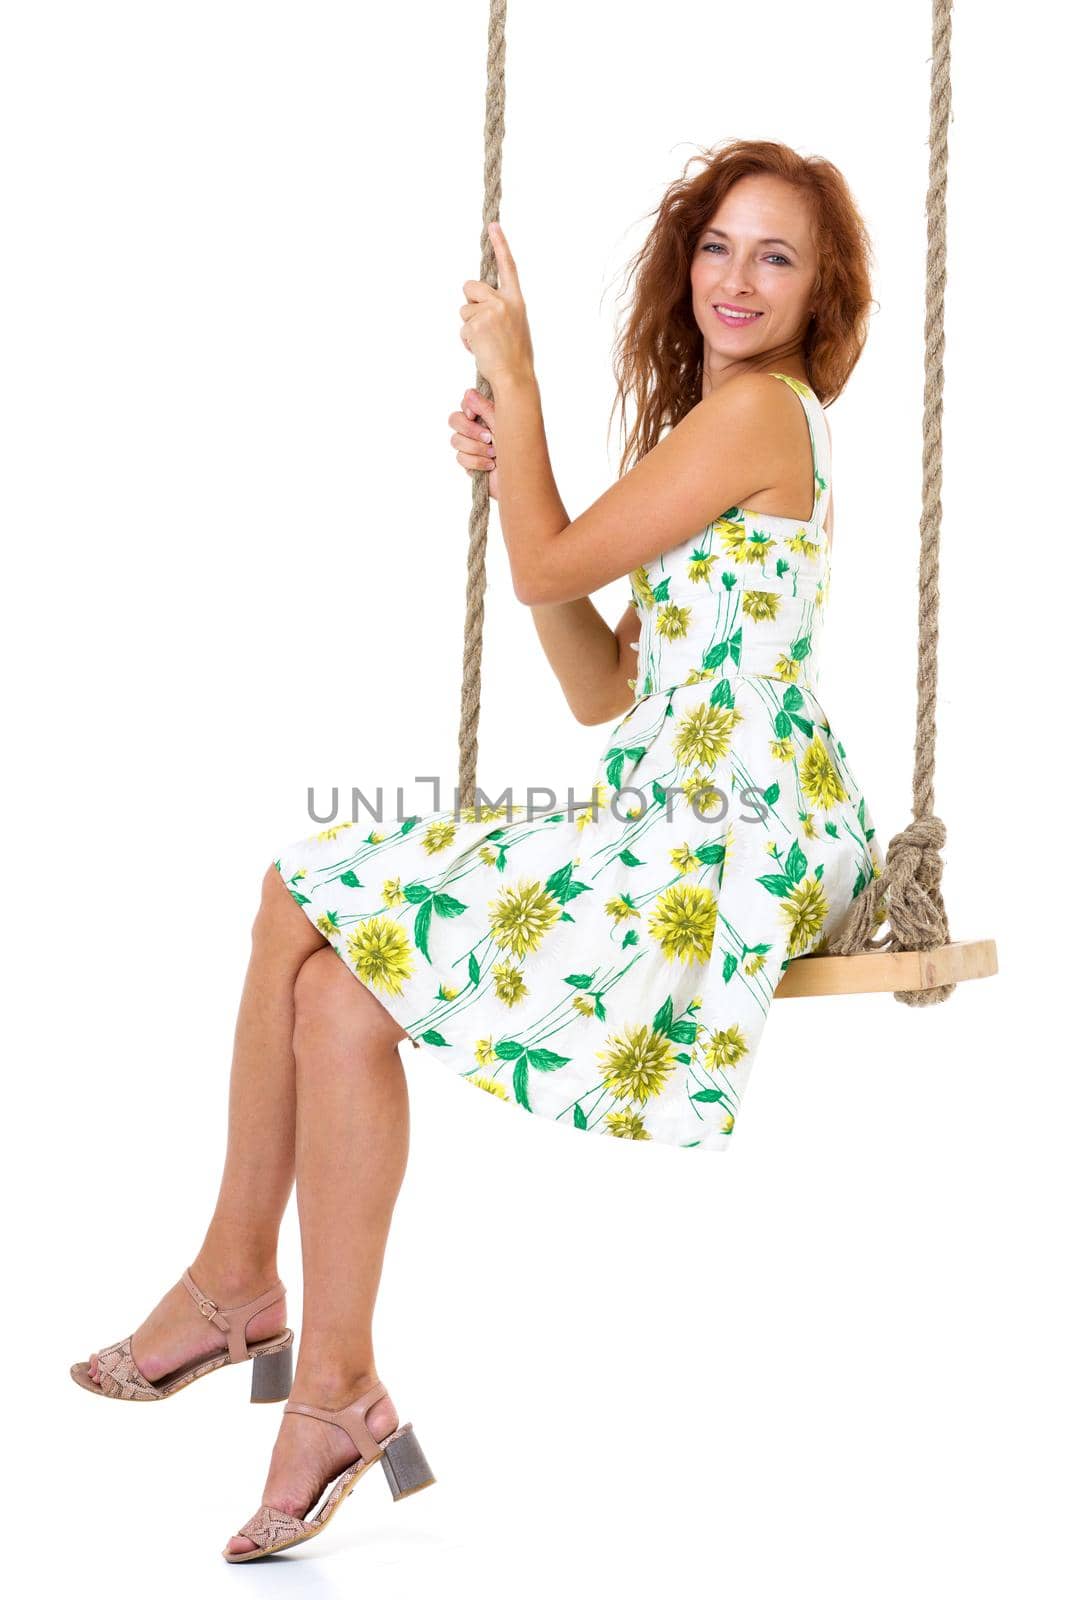 Beautiful young woman swinging on rope swing. Side view of happy woman wearing summer dress sitting on swing on isolated white background. Happy holidays and recreation concept